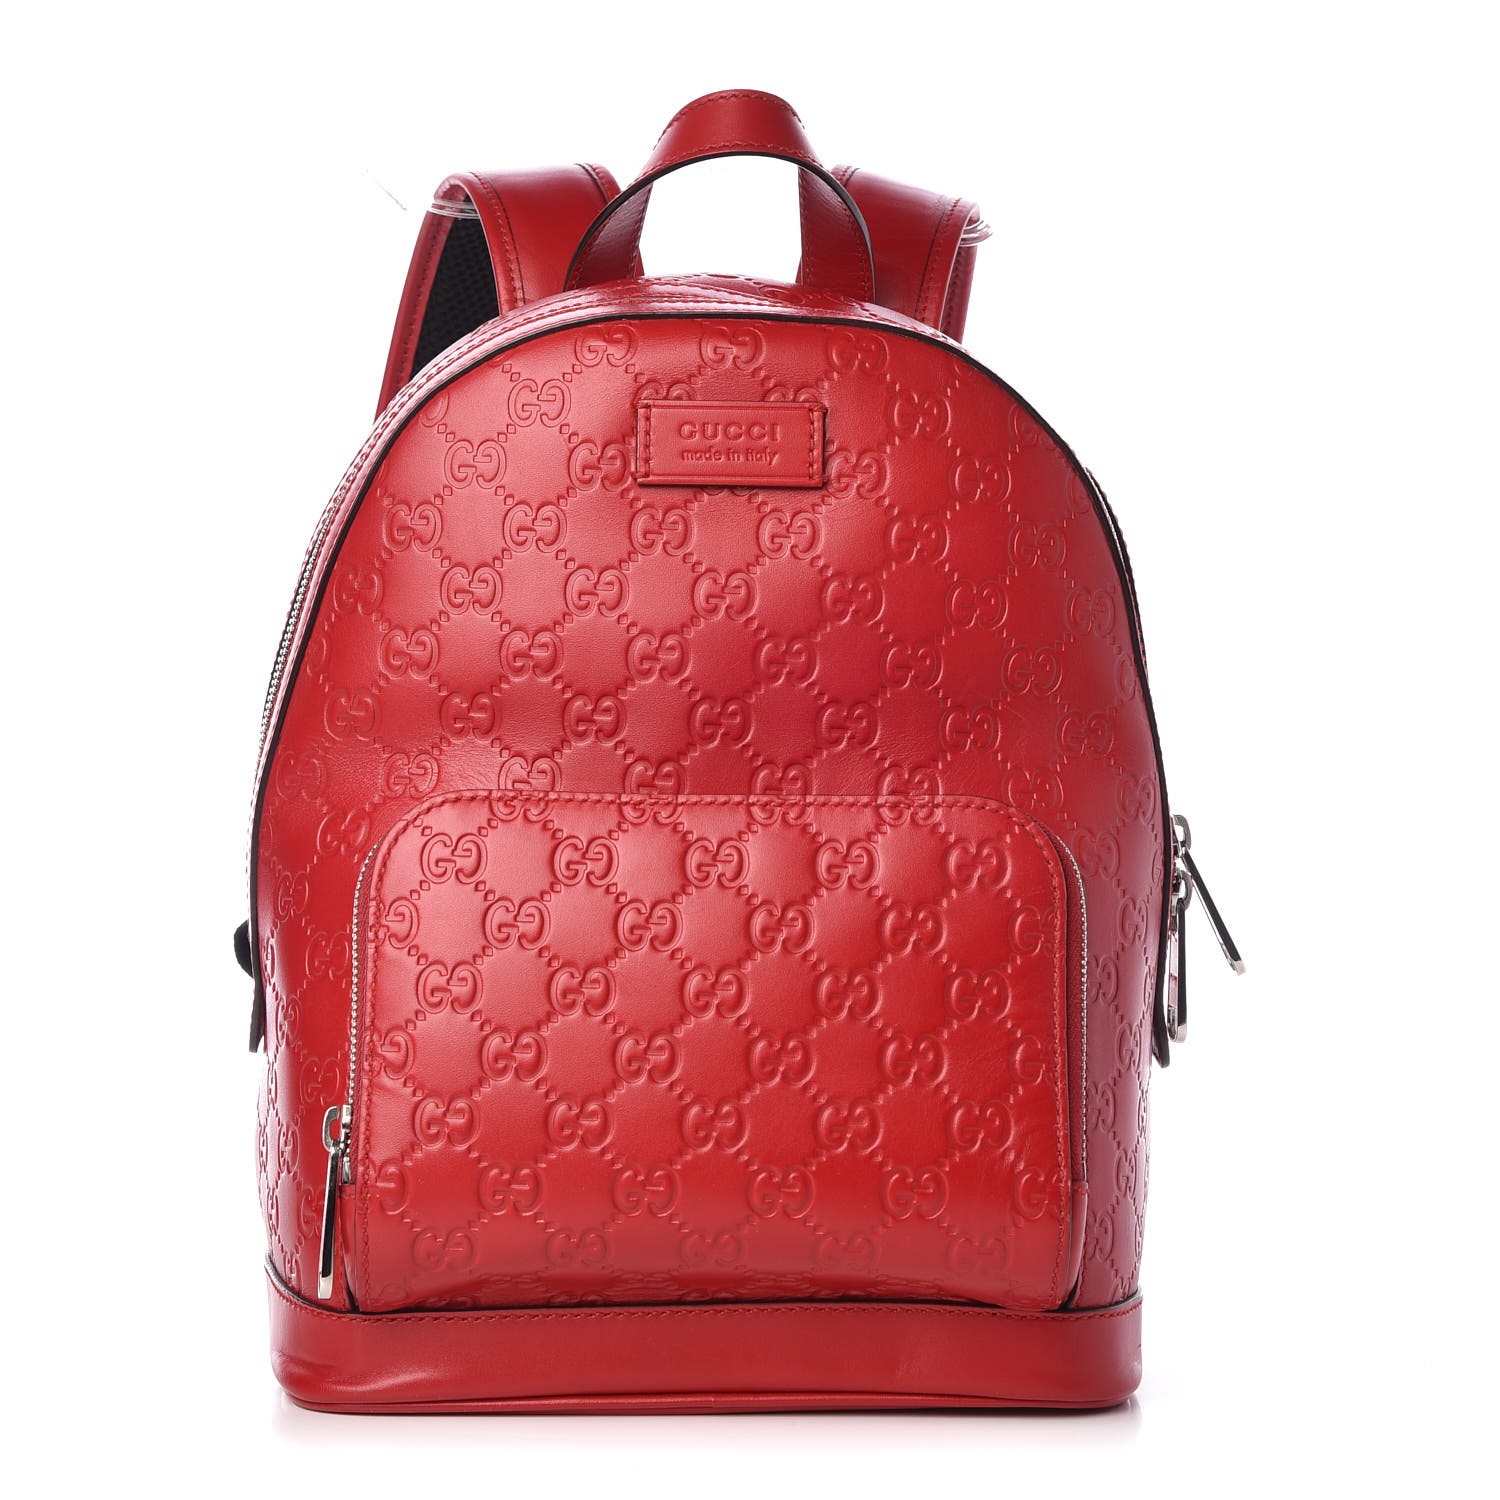 GUCCI Guccissima Small Signature Backpack Hibiscus Red 327678